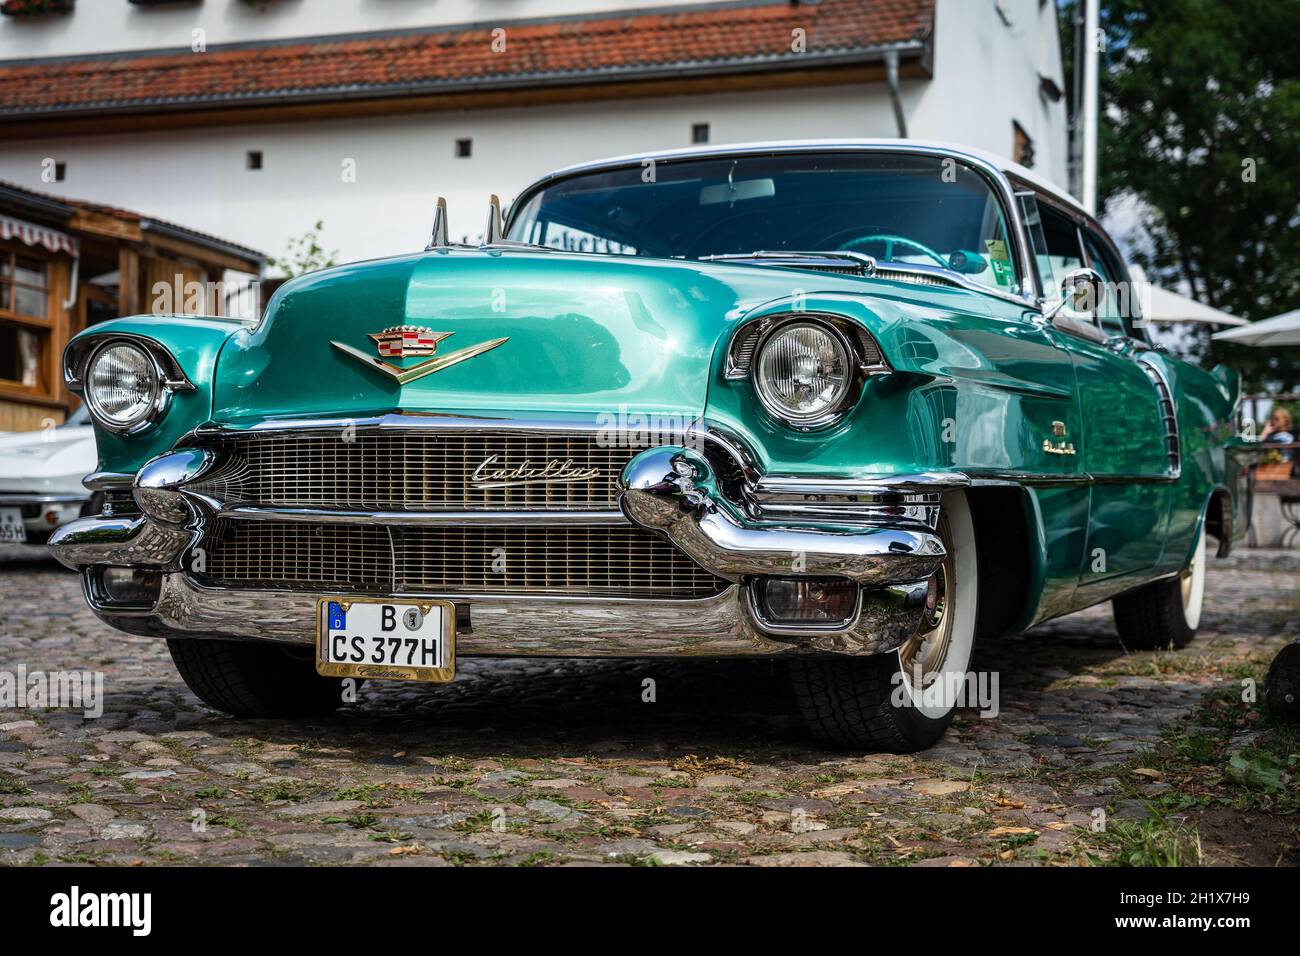 DIEDERSDORF, GERMANY - AUGUST 21, 2021: The luxury car Cadillac Series 62 Coupe de Ville, 1953. The exhibition of 'US Car Classics'. Stock Photo